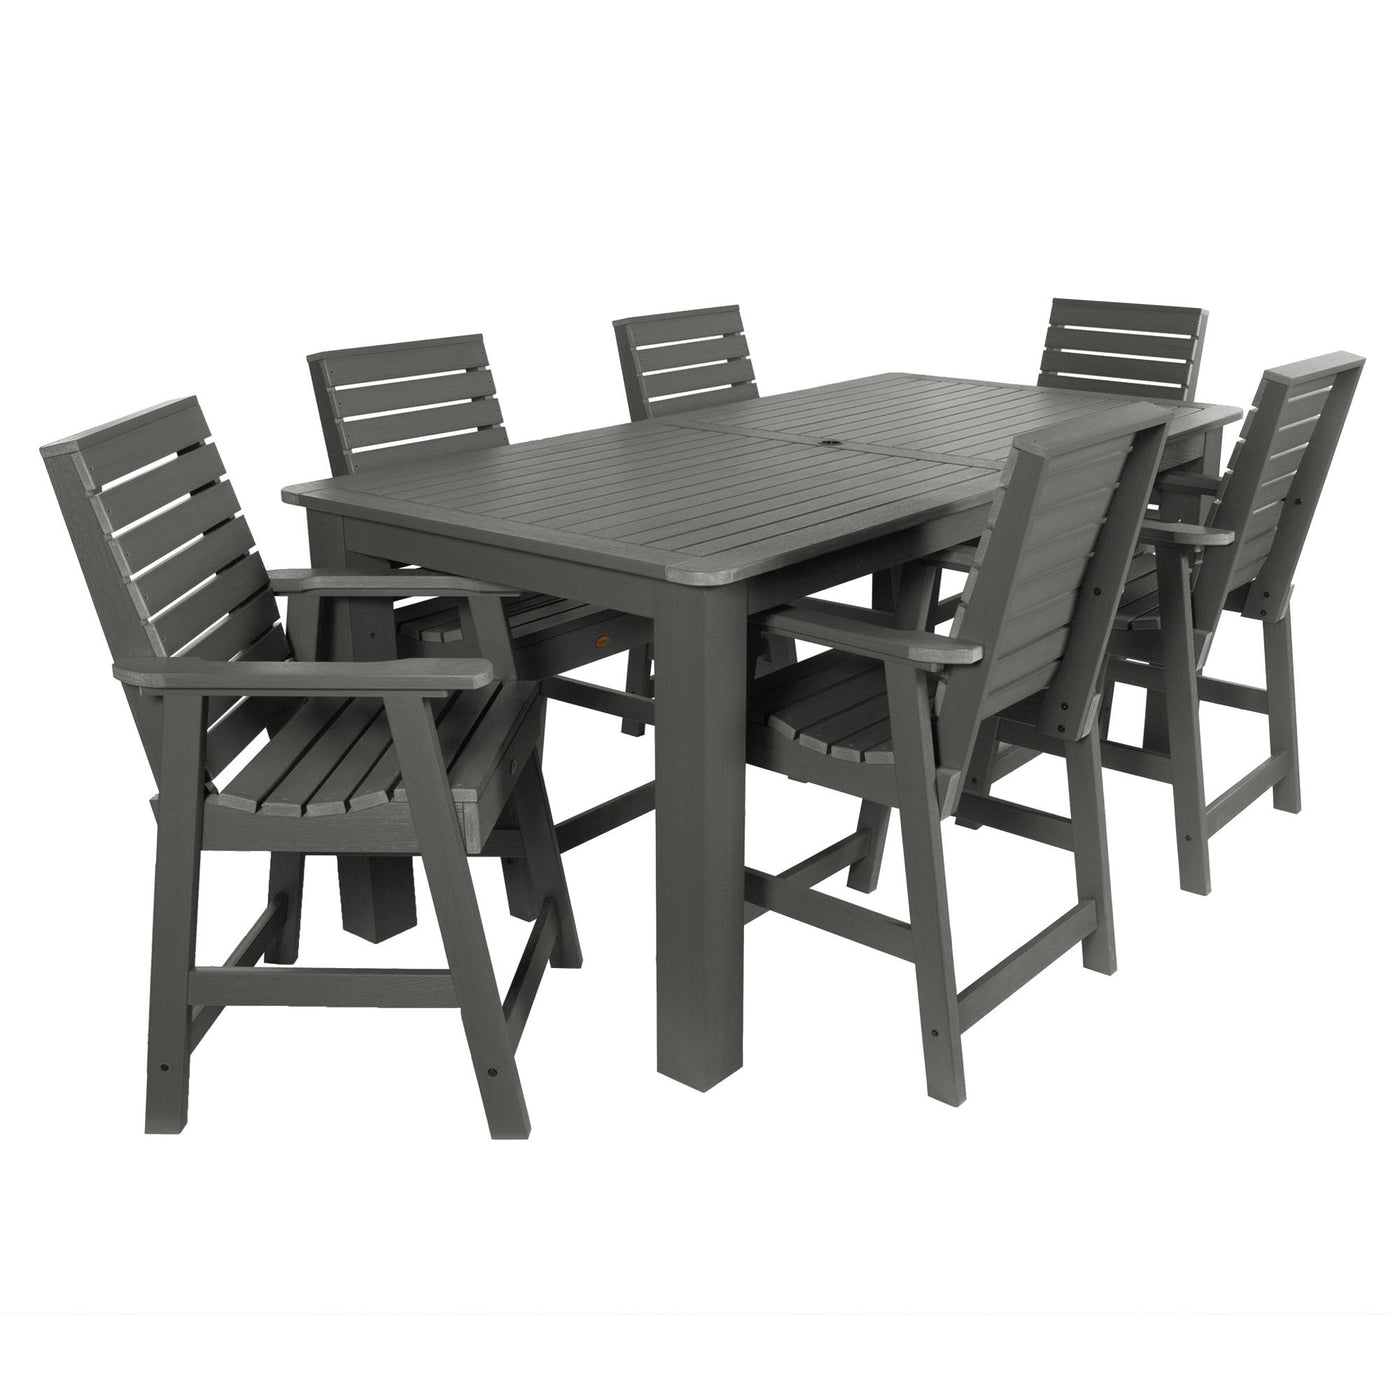 Weatherly 7pc Rectangular Outdoor Dining Set 42in x 84in - Counter Height Dining Highwood USA Coastal Teak 